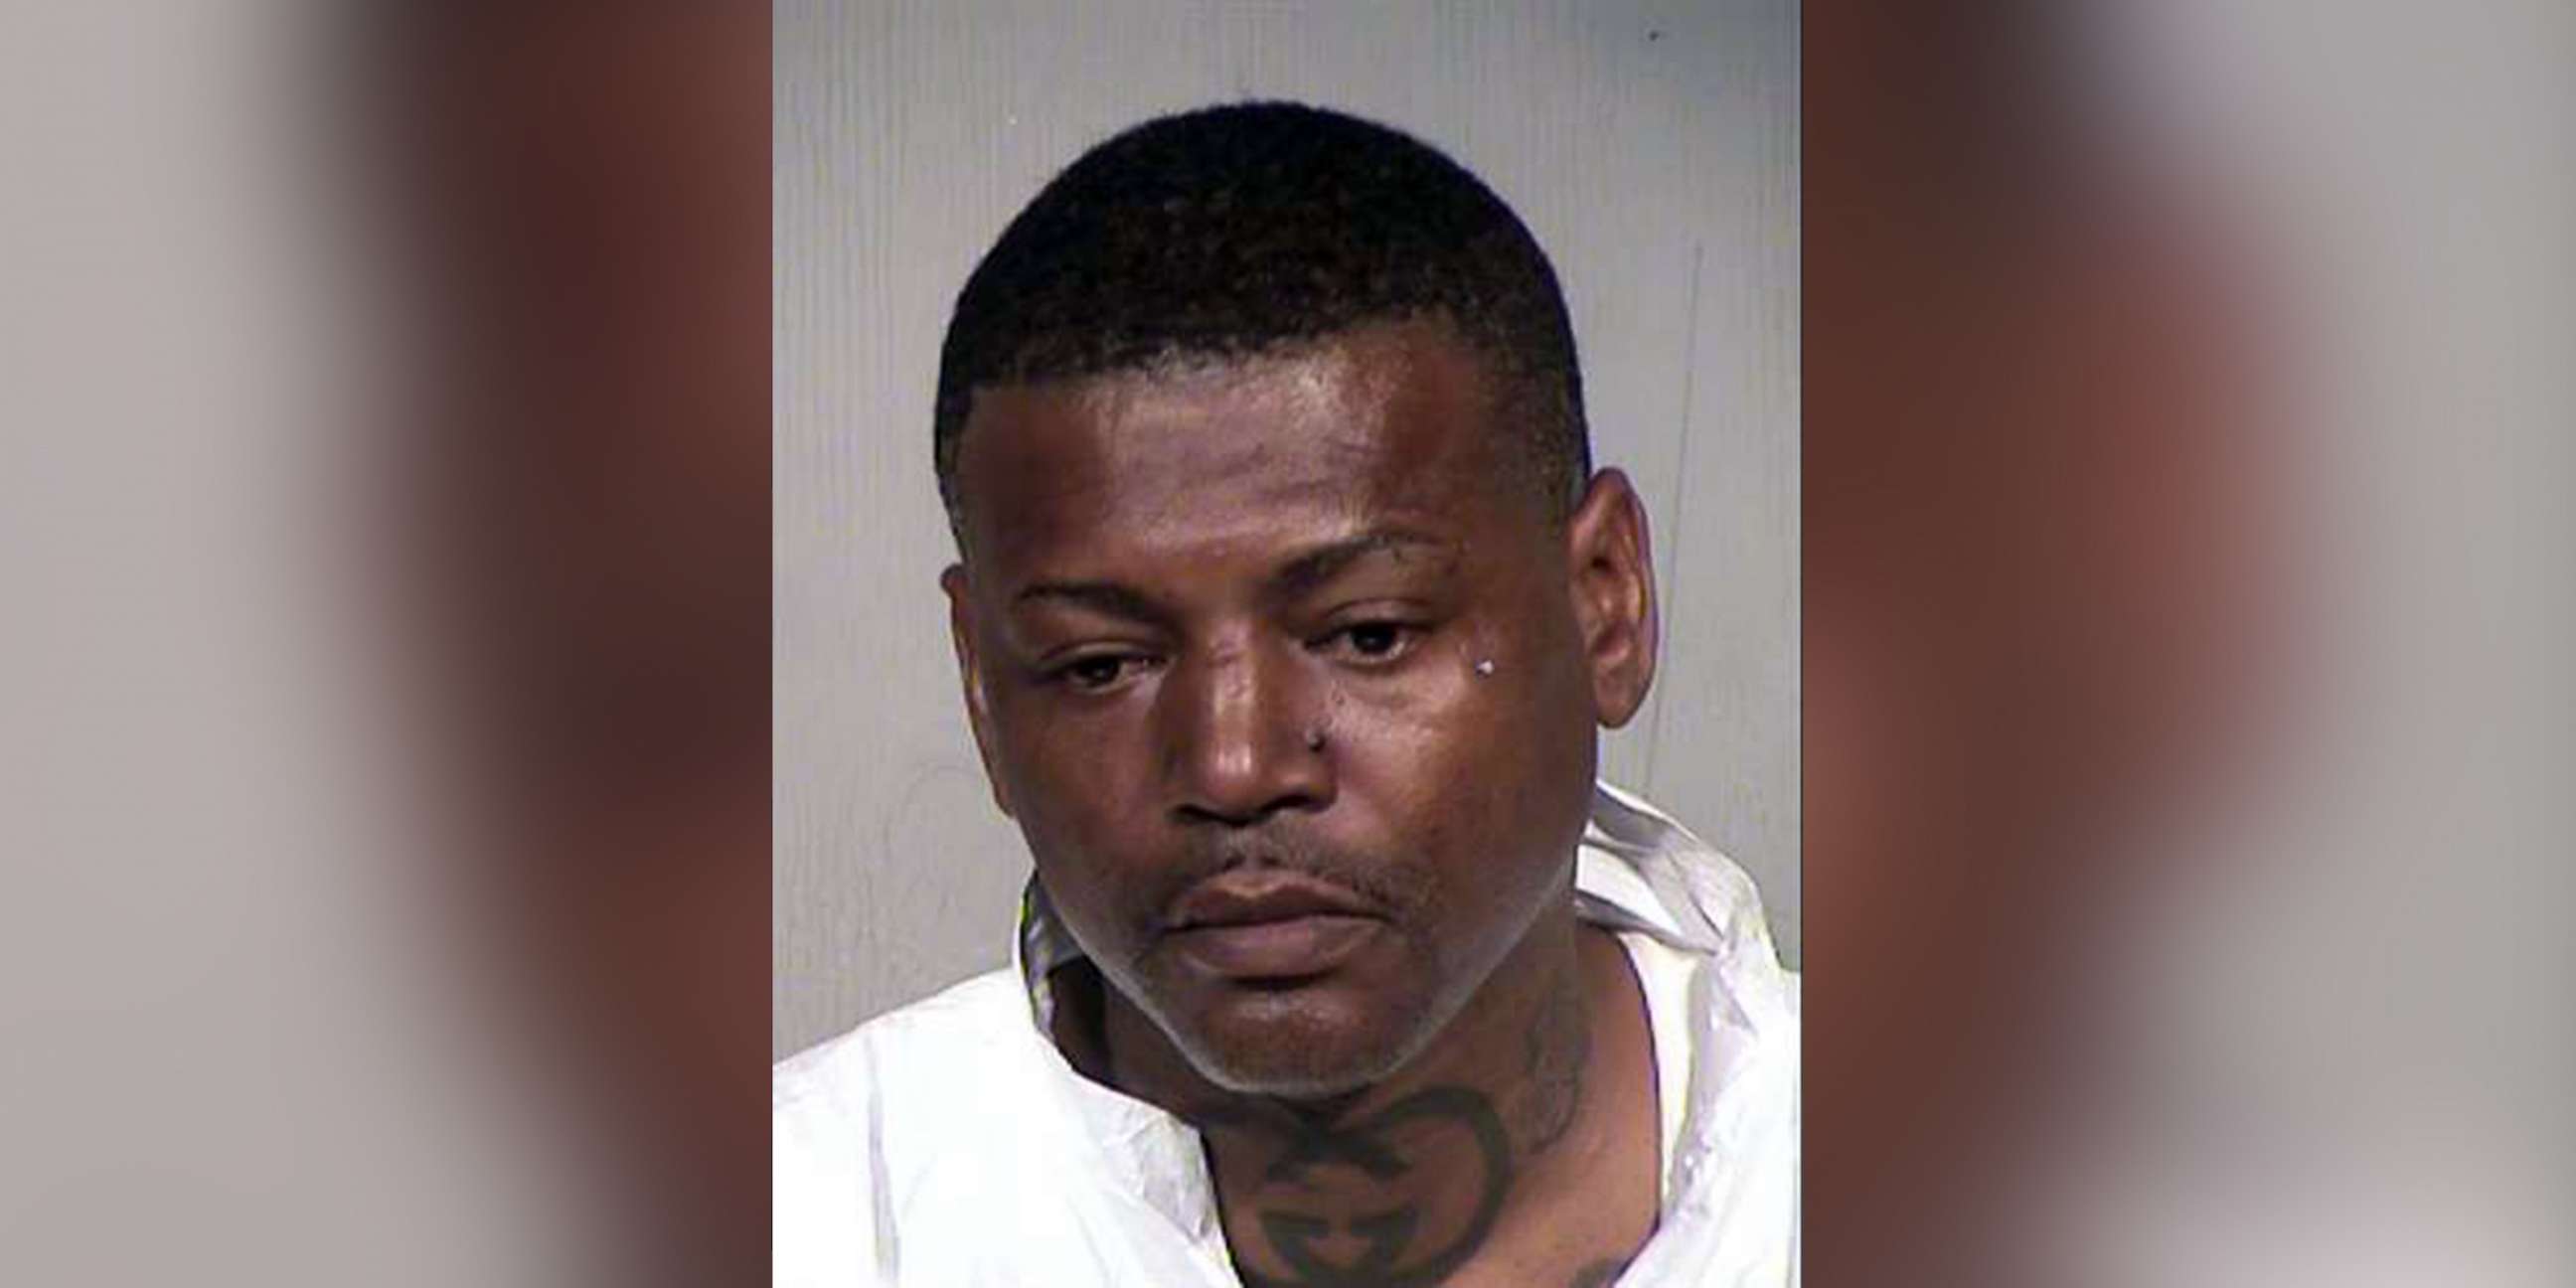 PHOTO: Melvin Harris III, 40, is pictured in an undated booking photo from the Maricopa County Sheriff.